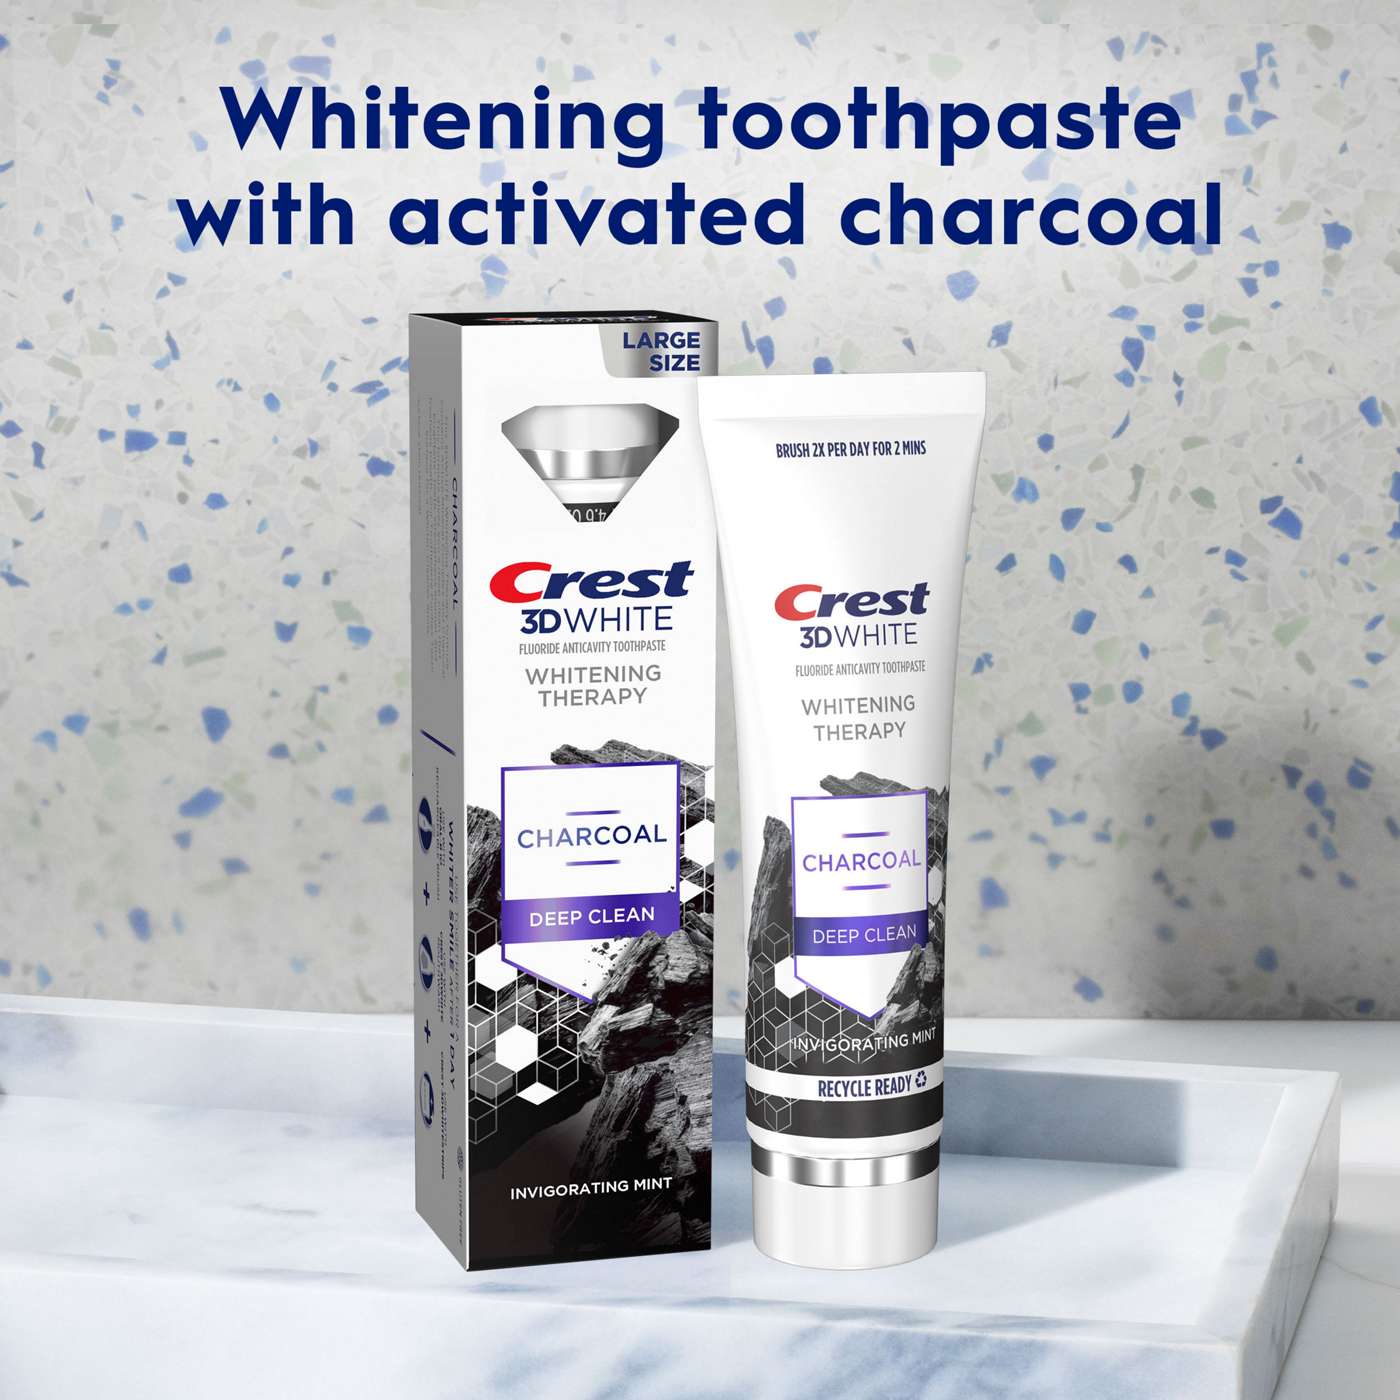 Crest 3D White Whitening Therapy Charcoal Toothpaste - Deep Clean; image 6 of 8